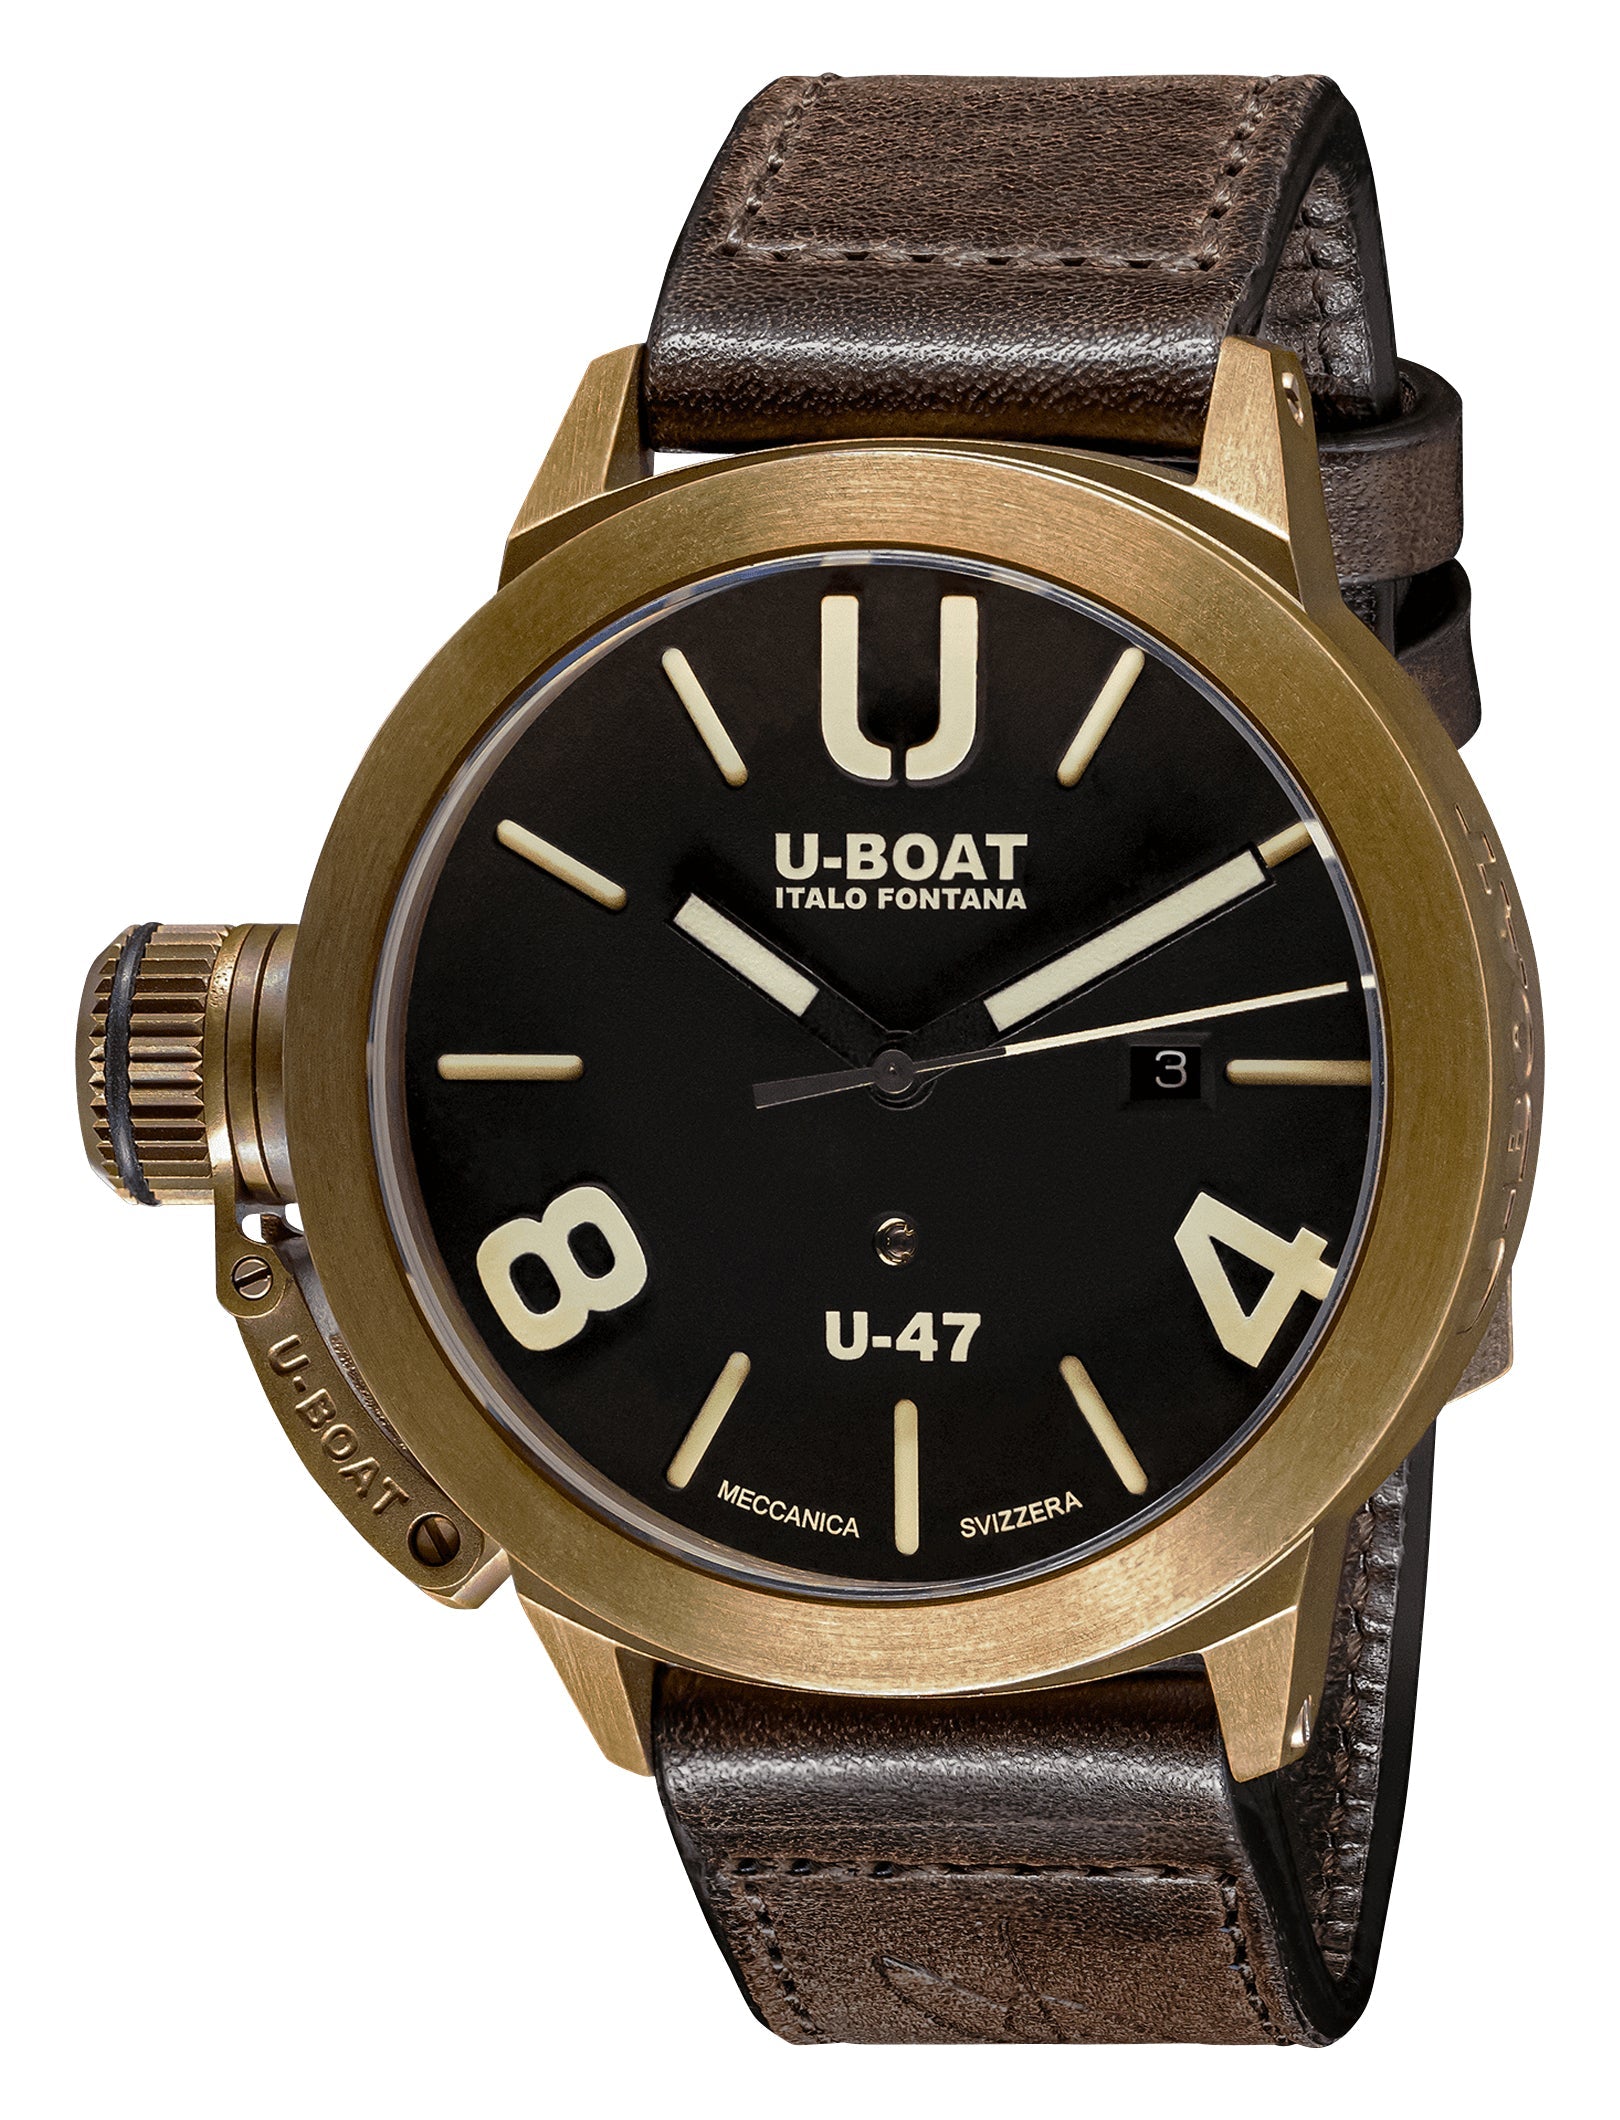 update alt-text with template Watches - Mens-U-Boat-7797-45 - 50 mm, black, bronze case, Classico U-47, date, leather, mens, menswatches, new arrivals, round, rpSKU_8105, rpSKU_8106, rpSKU_8898, rpSKU_8899, rpSKU_8900, swiss automatic, U-Boat, watches-Watches & Beyond